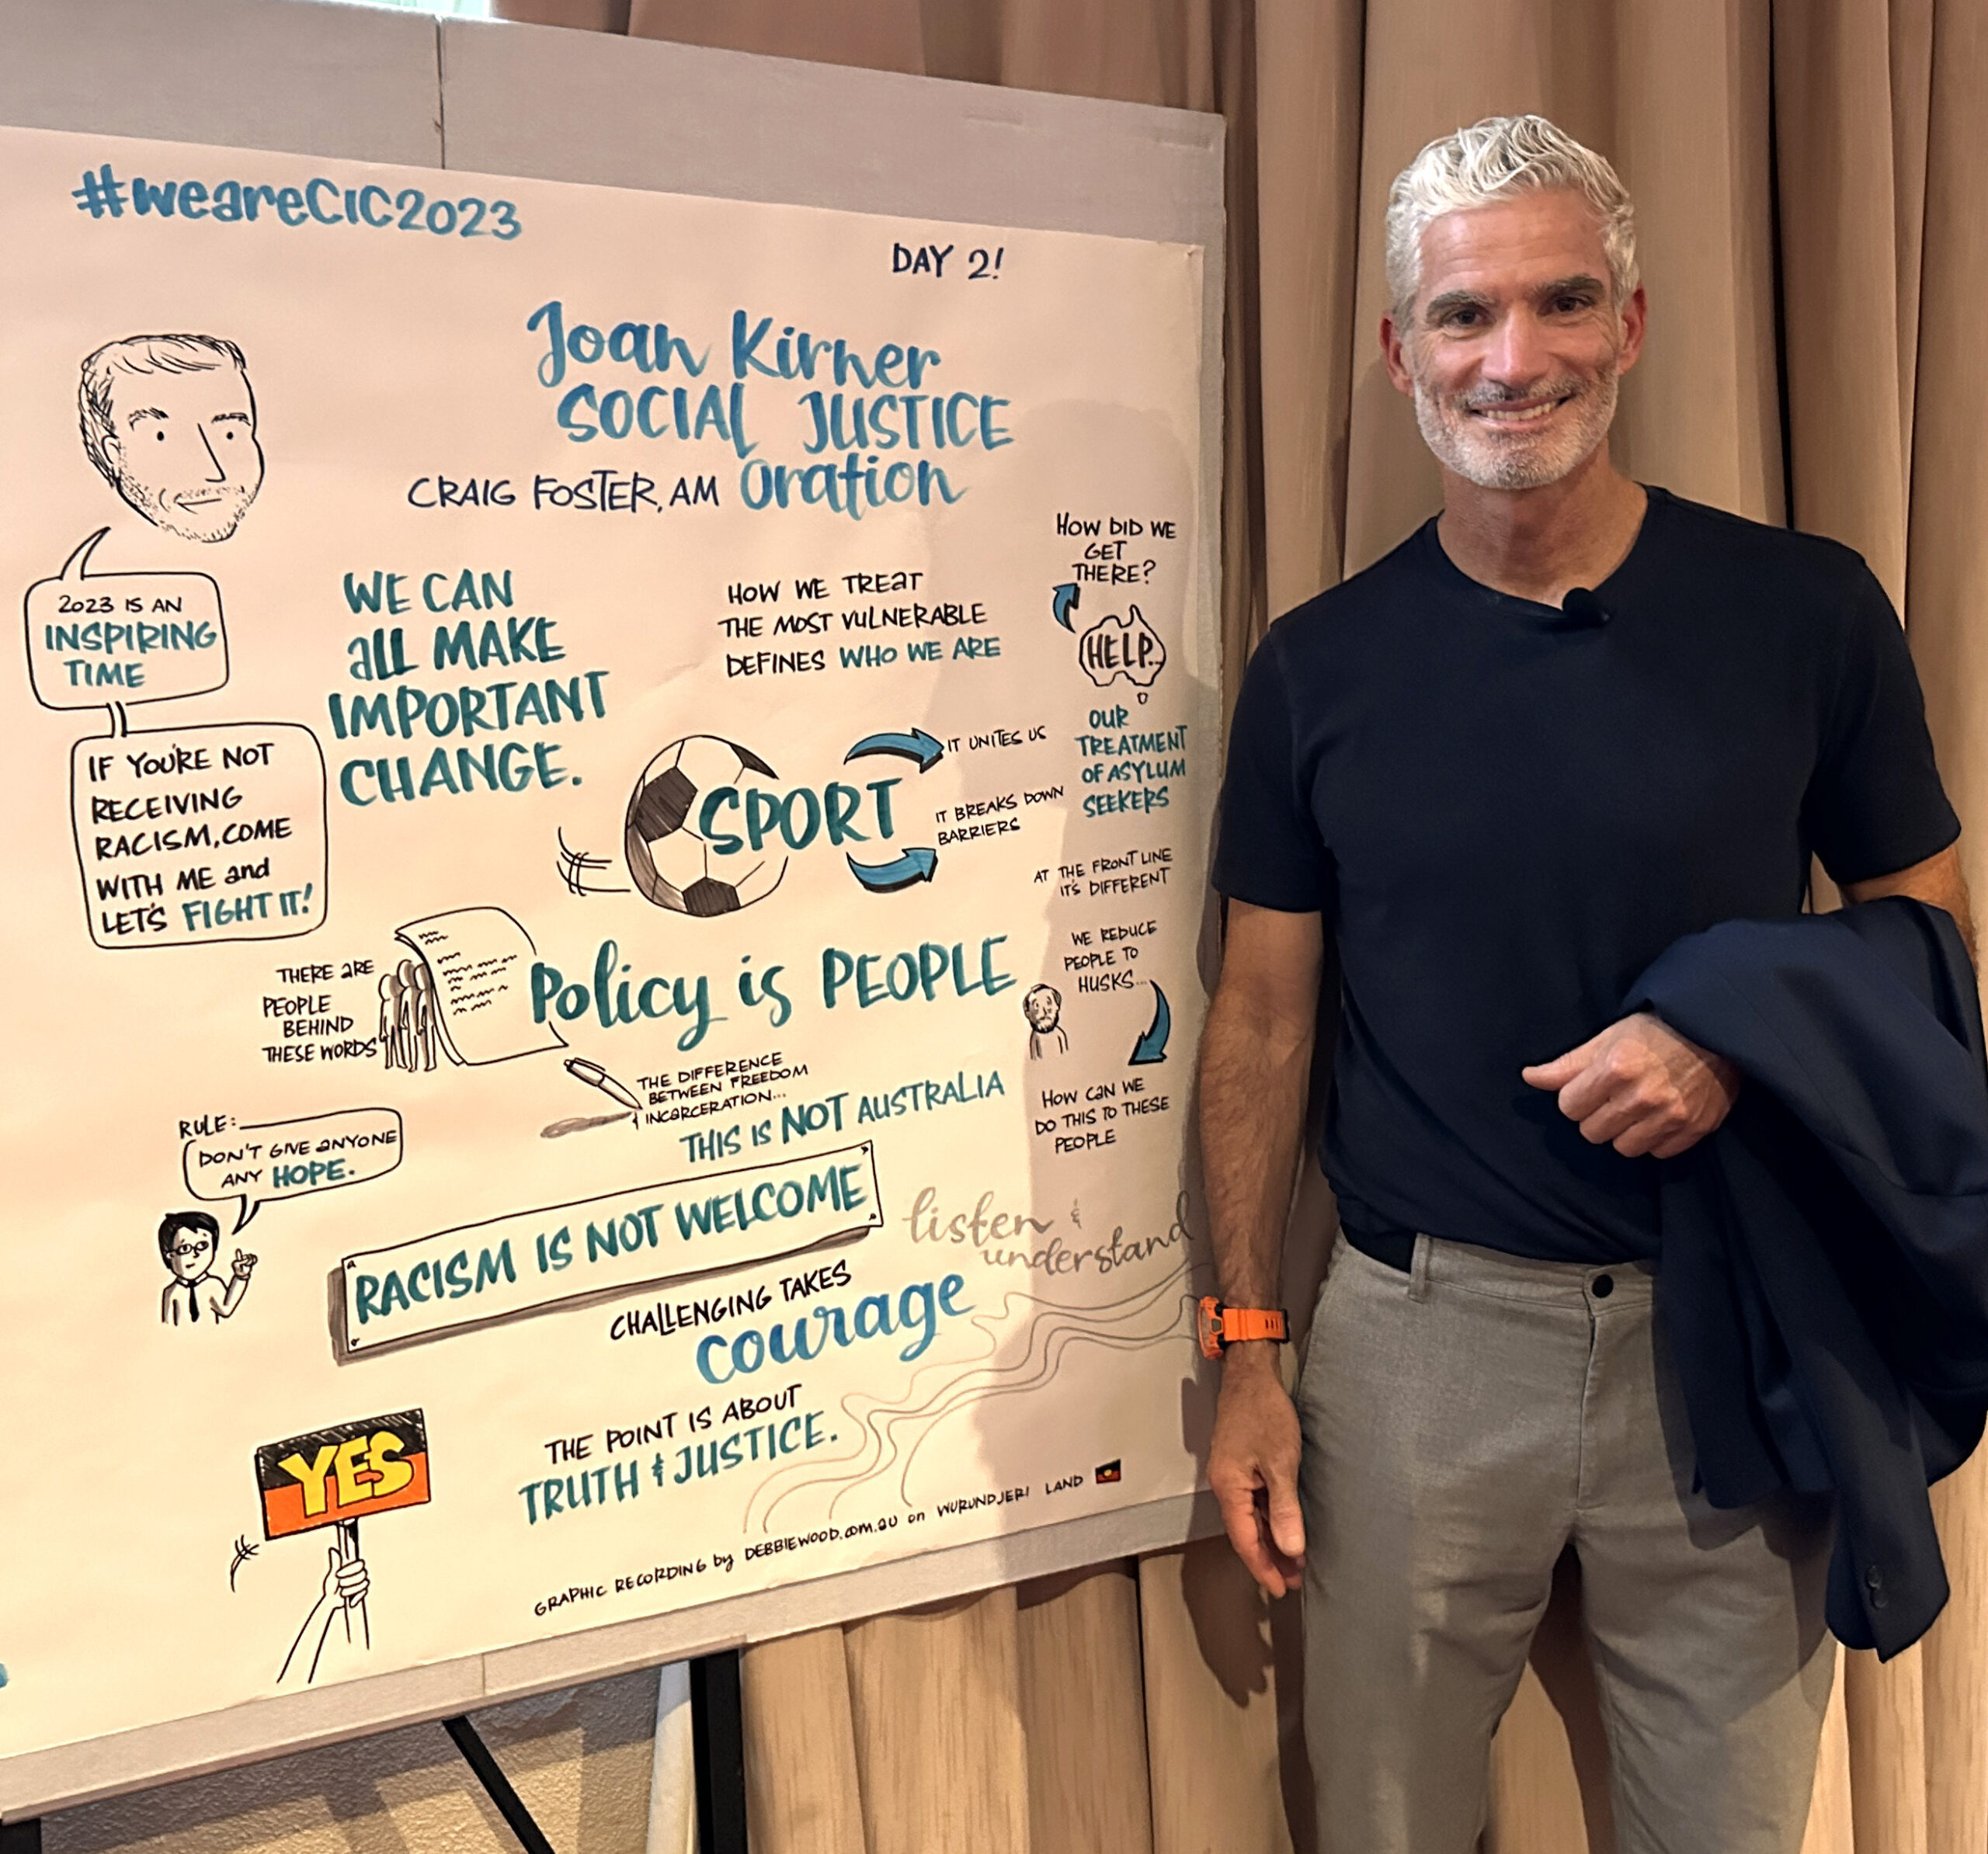 Craig Foster AM at Communities in Control with graphic recording of his Oration